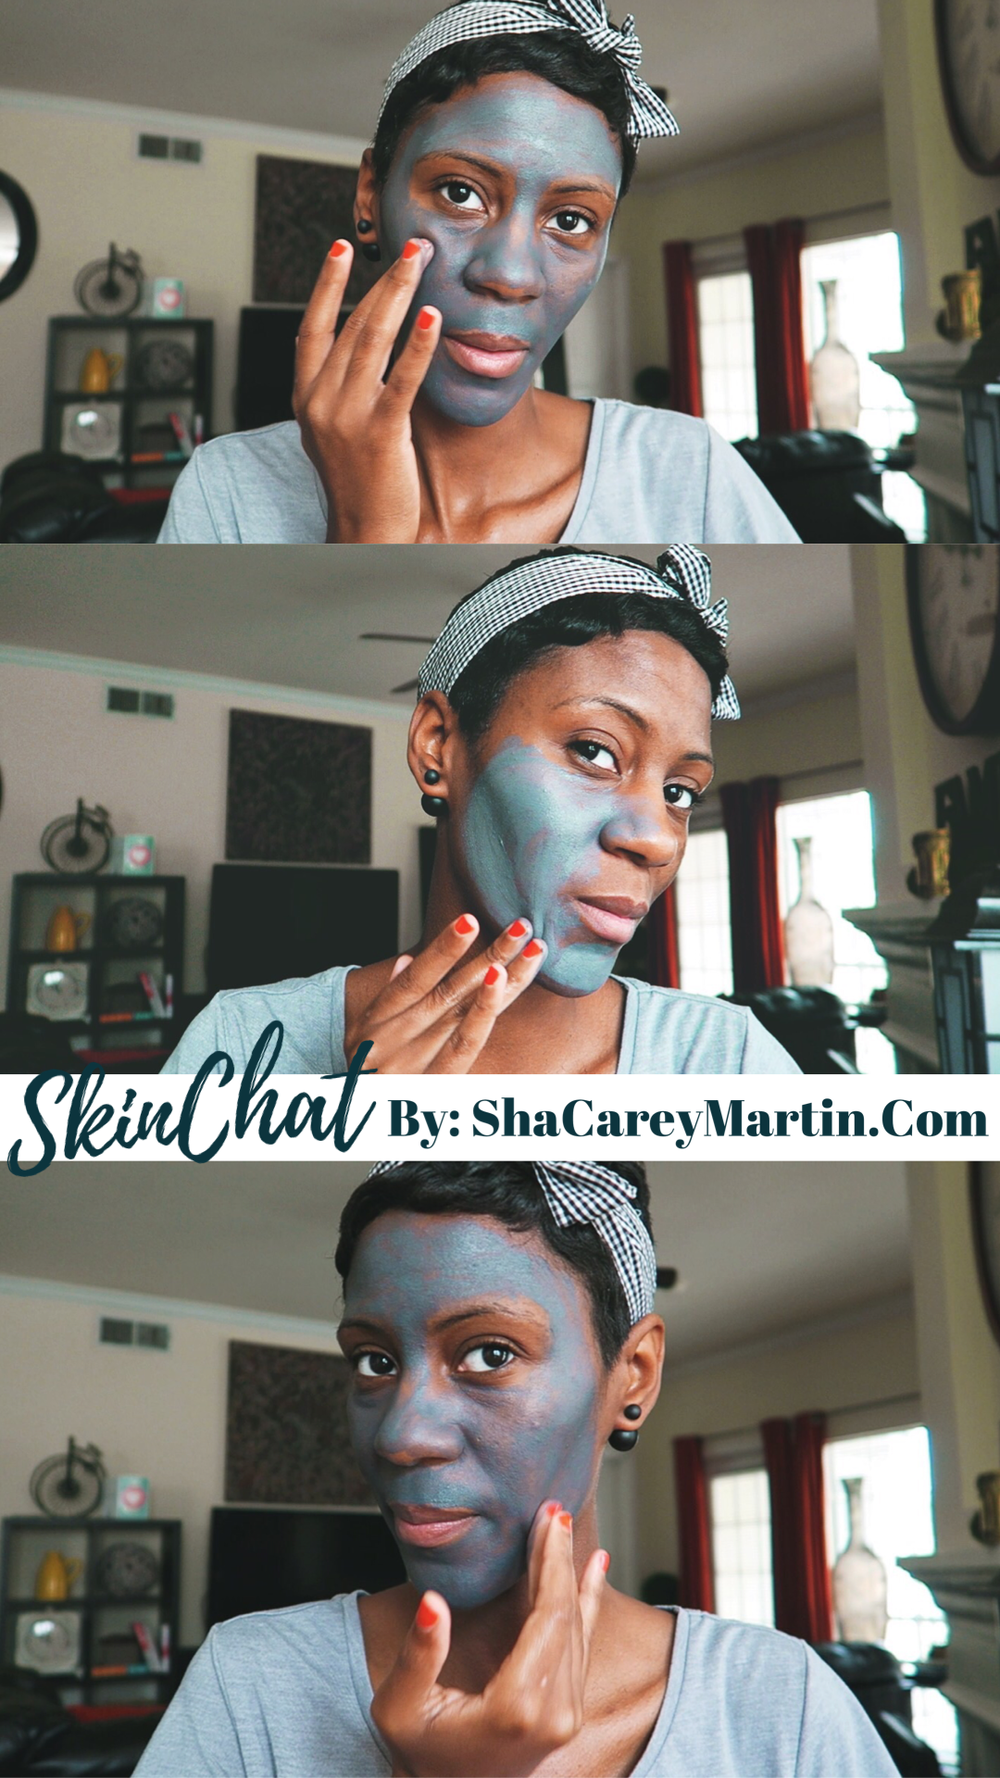 An Honest SKin Update: The Blemishes, Masking and More!